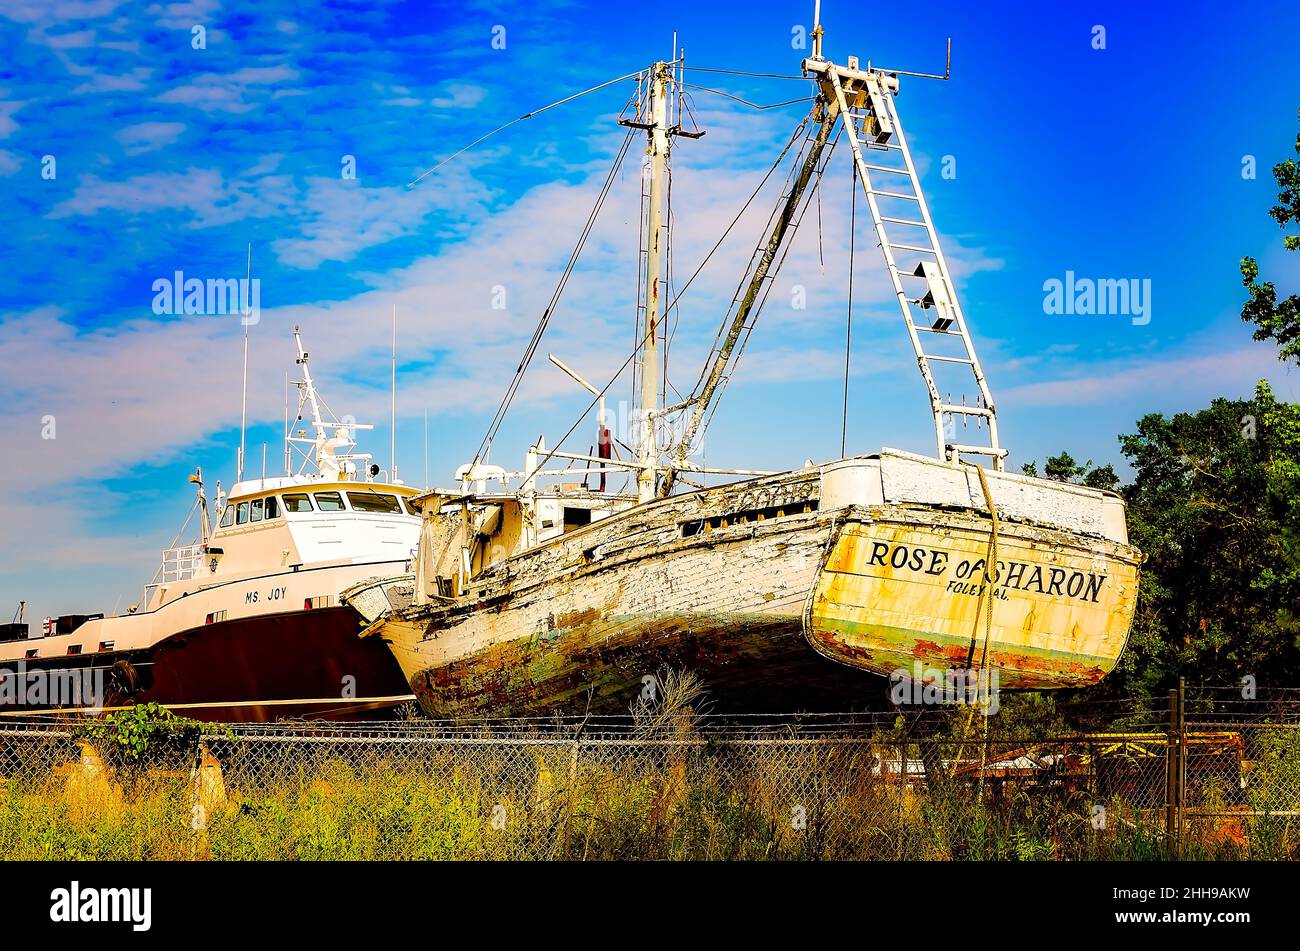 An old wooden shrimp boat is in dry dock for repair at a local shipyard, May 15, 2016, in Bayou La Batre, Alabama. Stock Photo